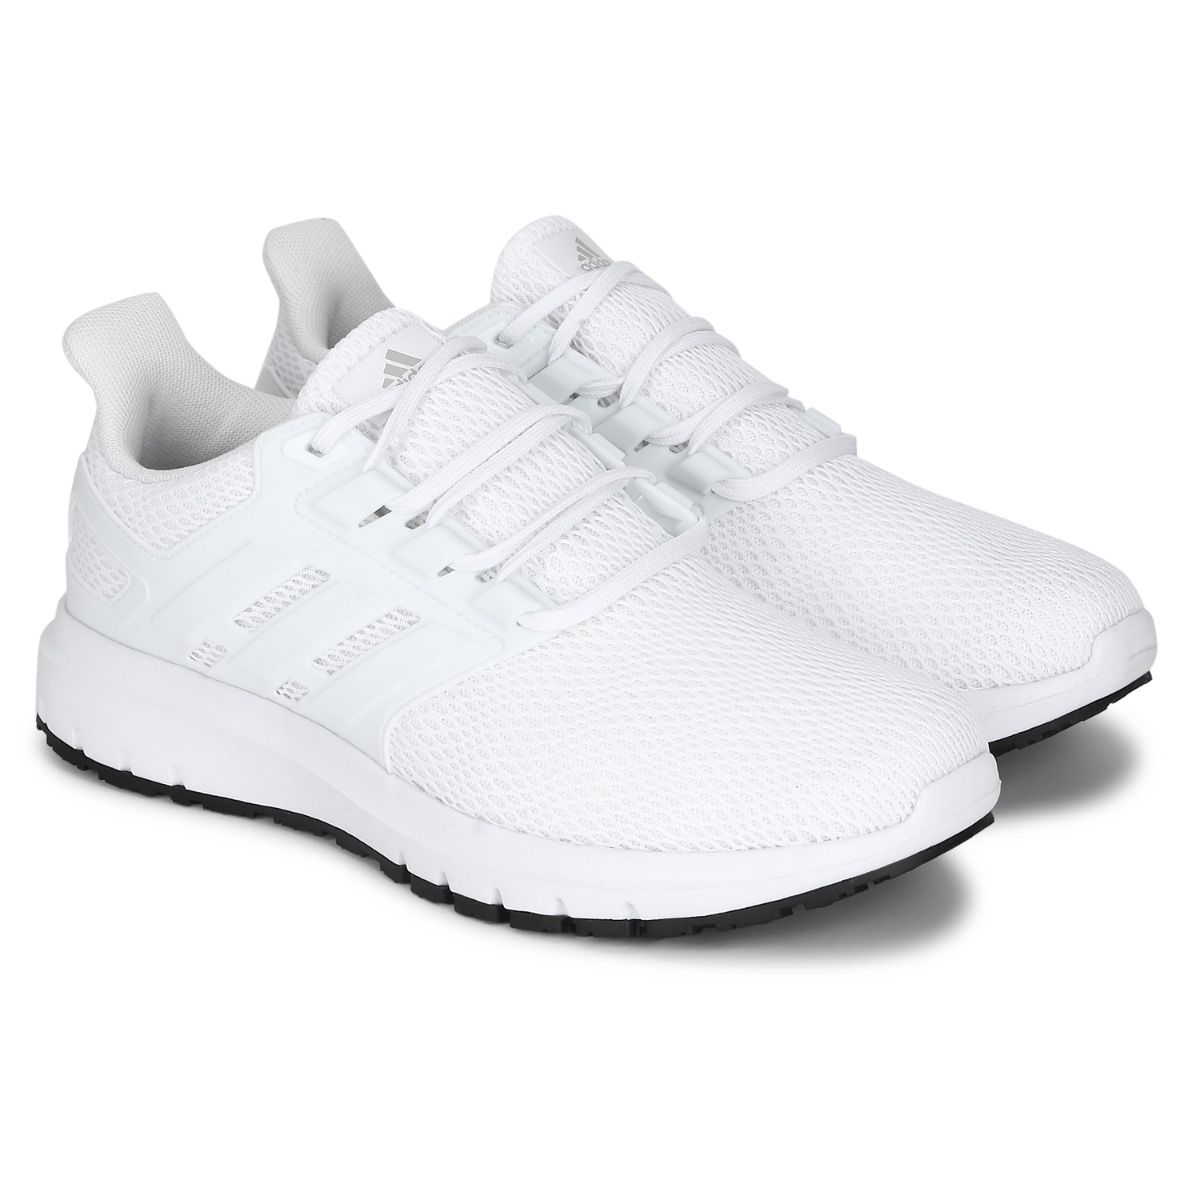 adidas Ultimashow White Running Shoes: Buy adidas Ultimashow White Running  Shoes Online at Best Price in India | Nykaa